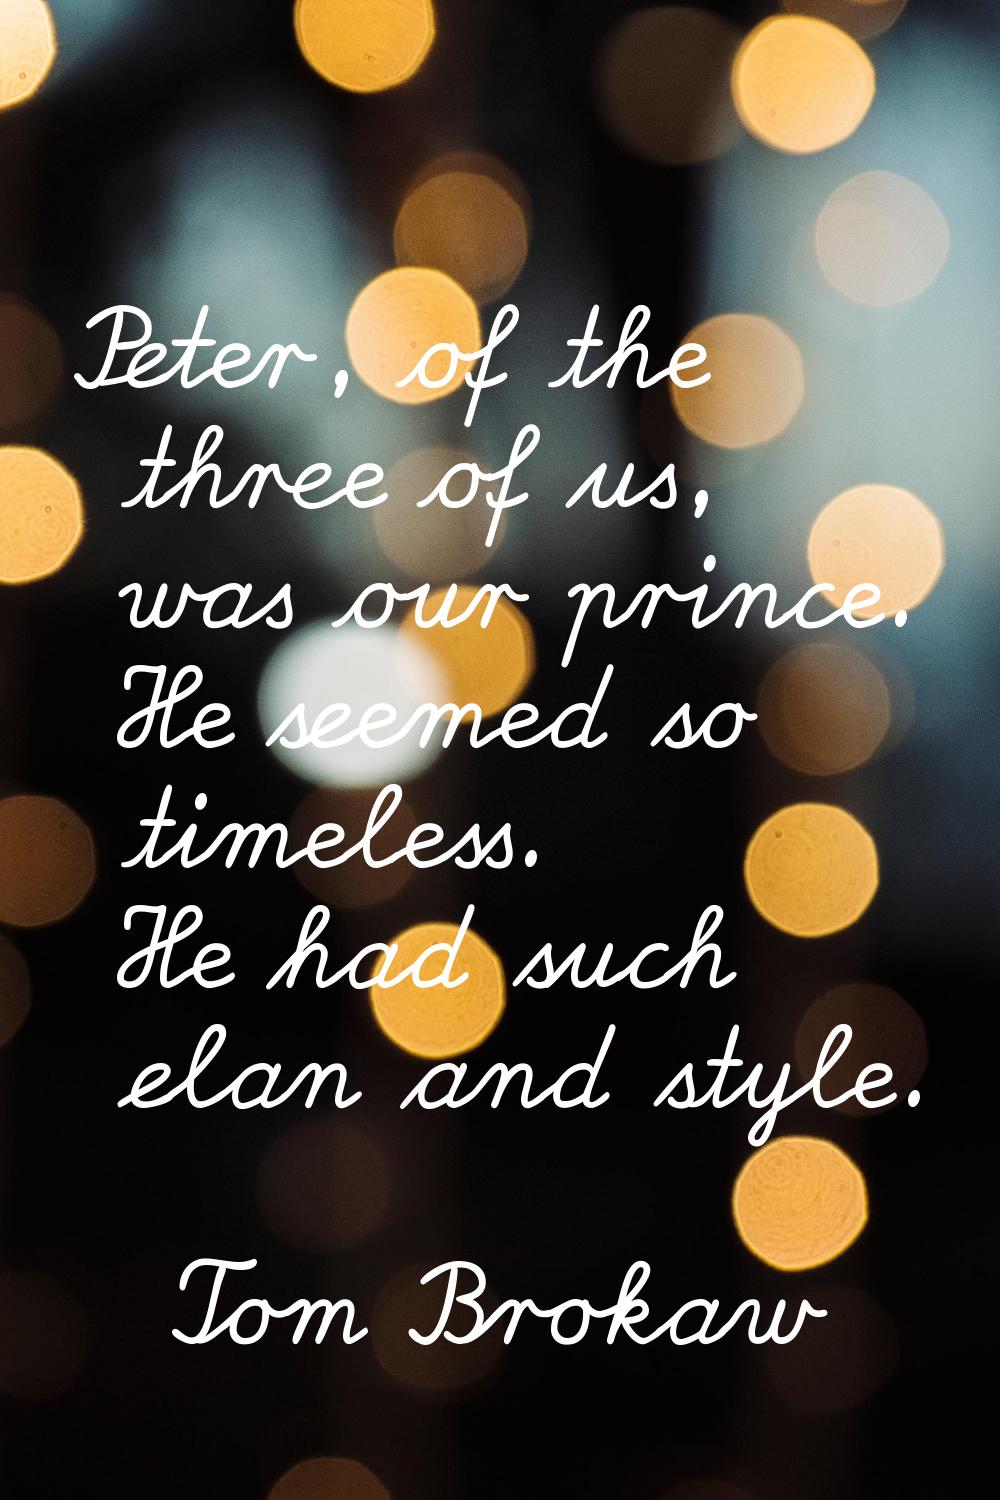 Peter, of the three of us, was our prince. He seemed so timeless. He had such elan and style.